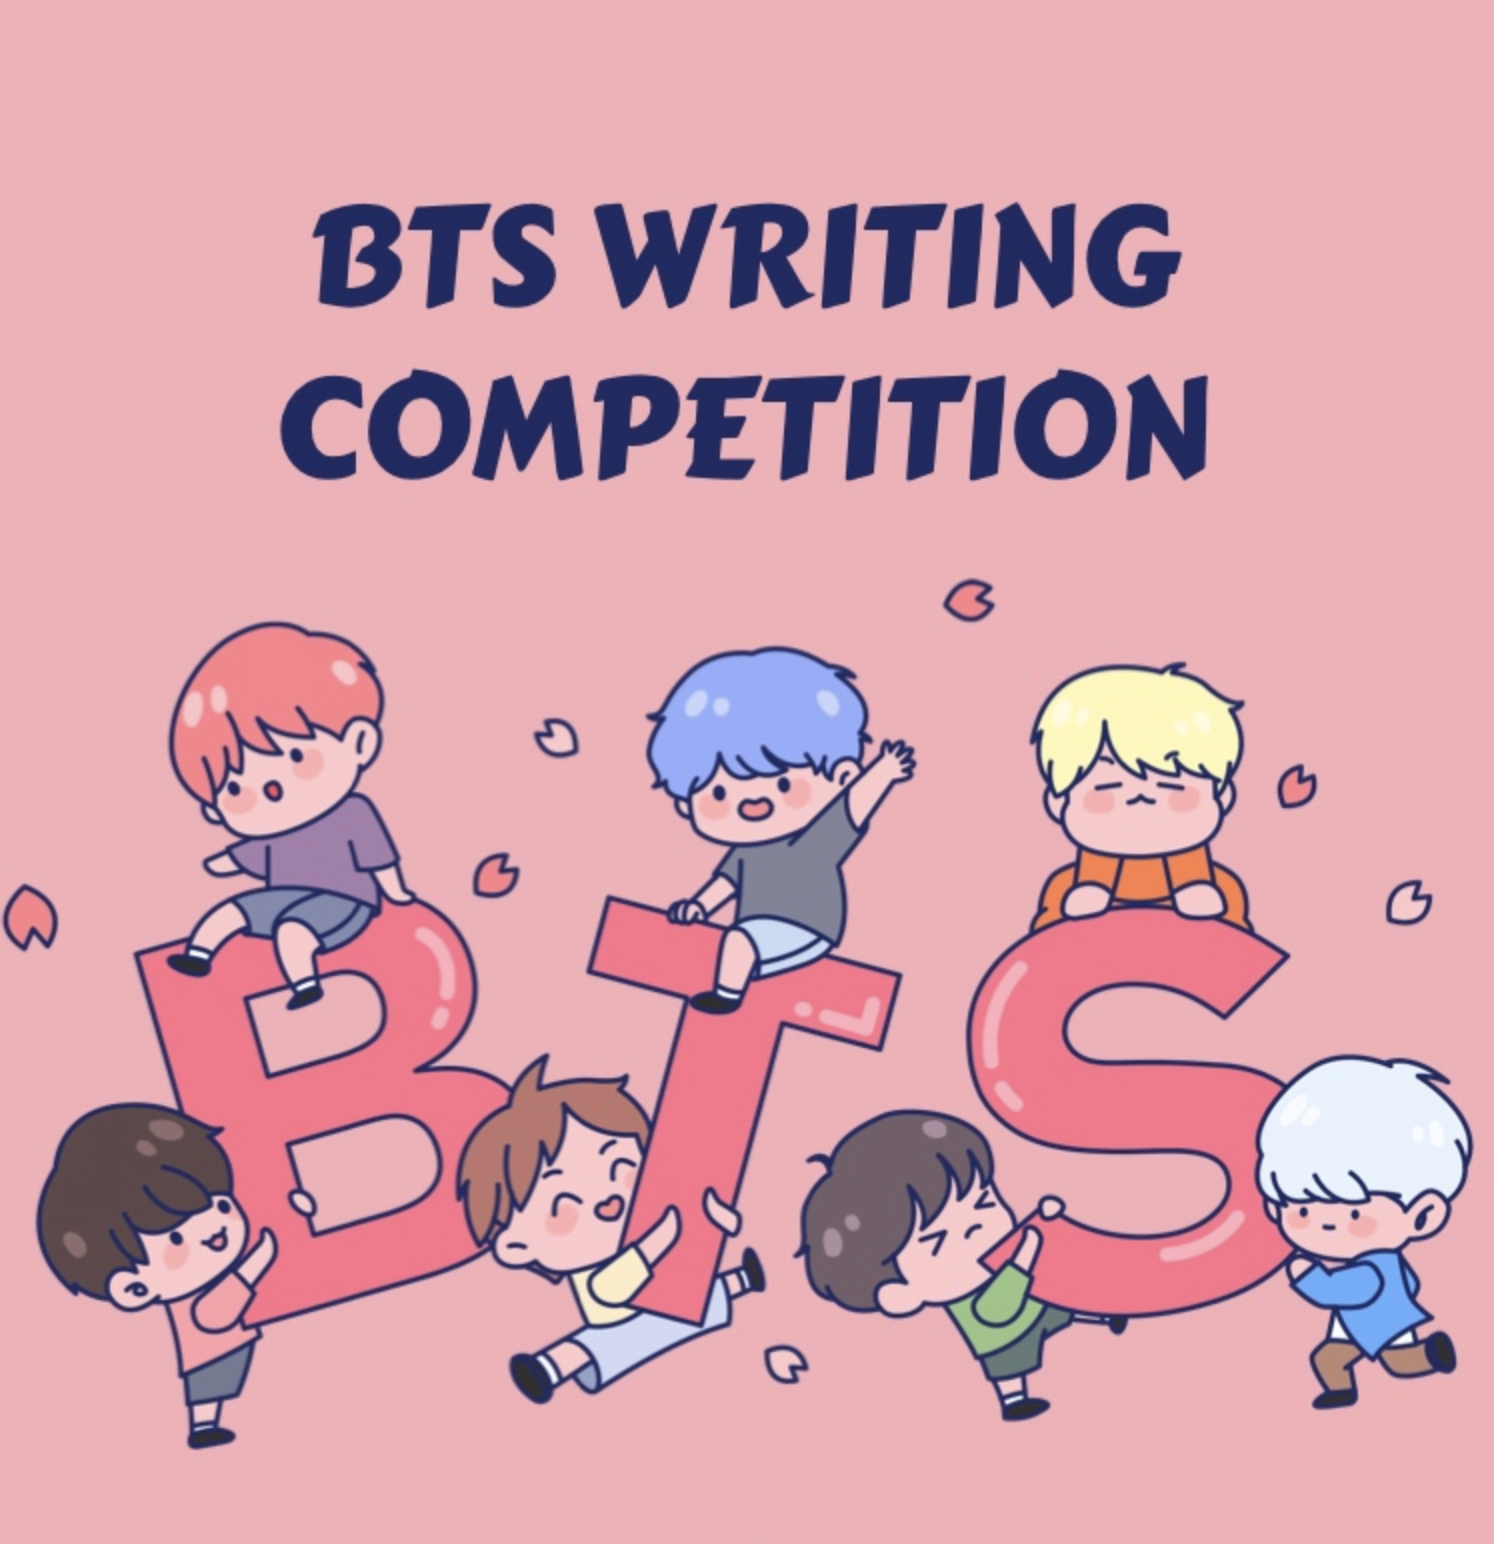 Write BTS. BTS writing. Проект про БТС. Competition rules